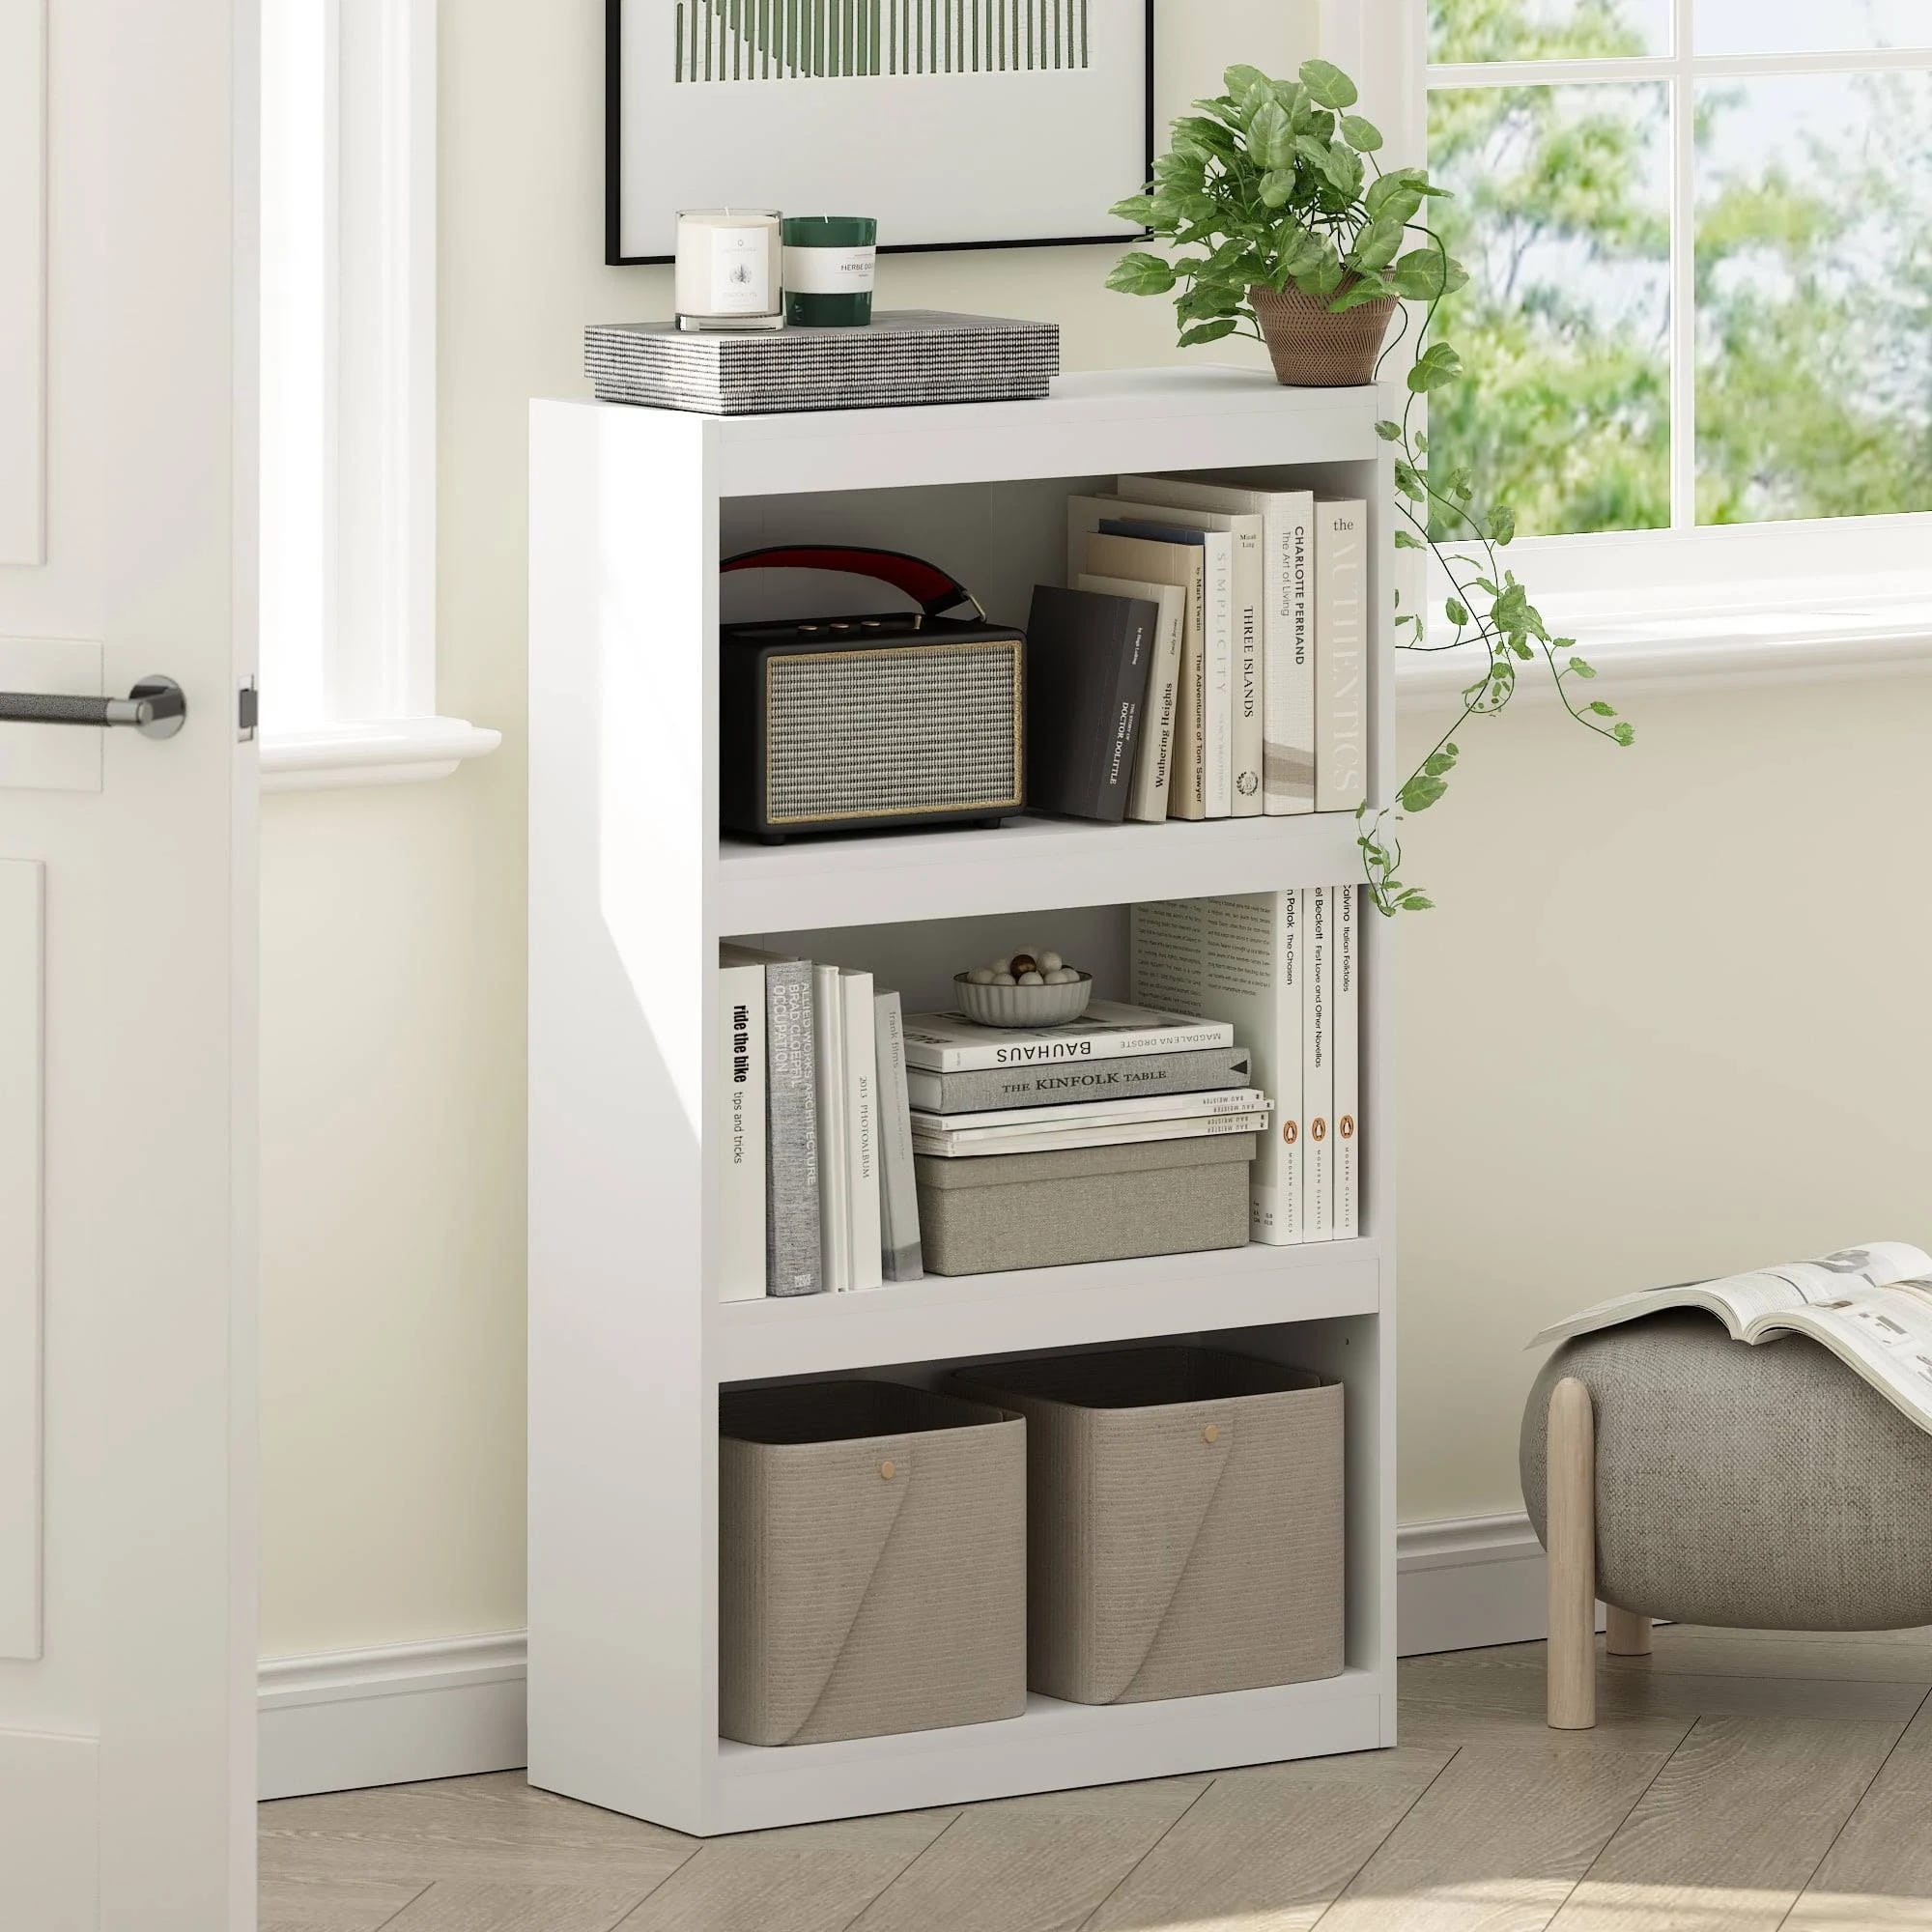 Furinno Jaya Series 3-Tier Adjustable Shelf Bookcase for Home and Office | Image